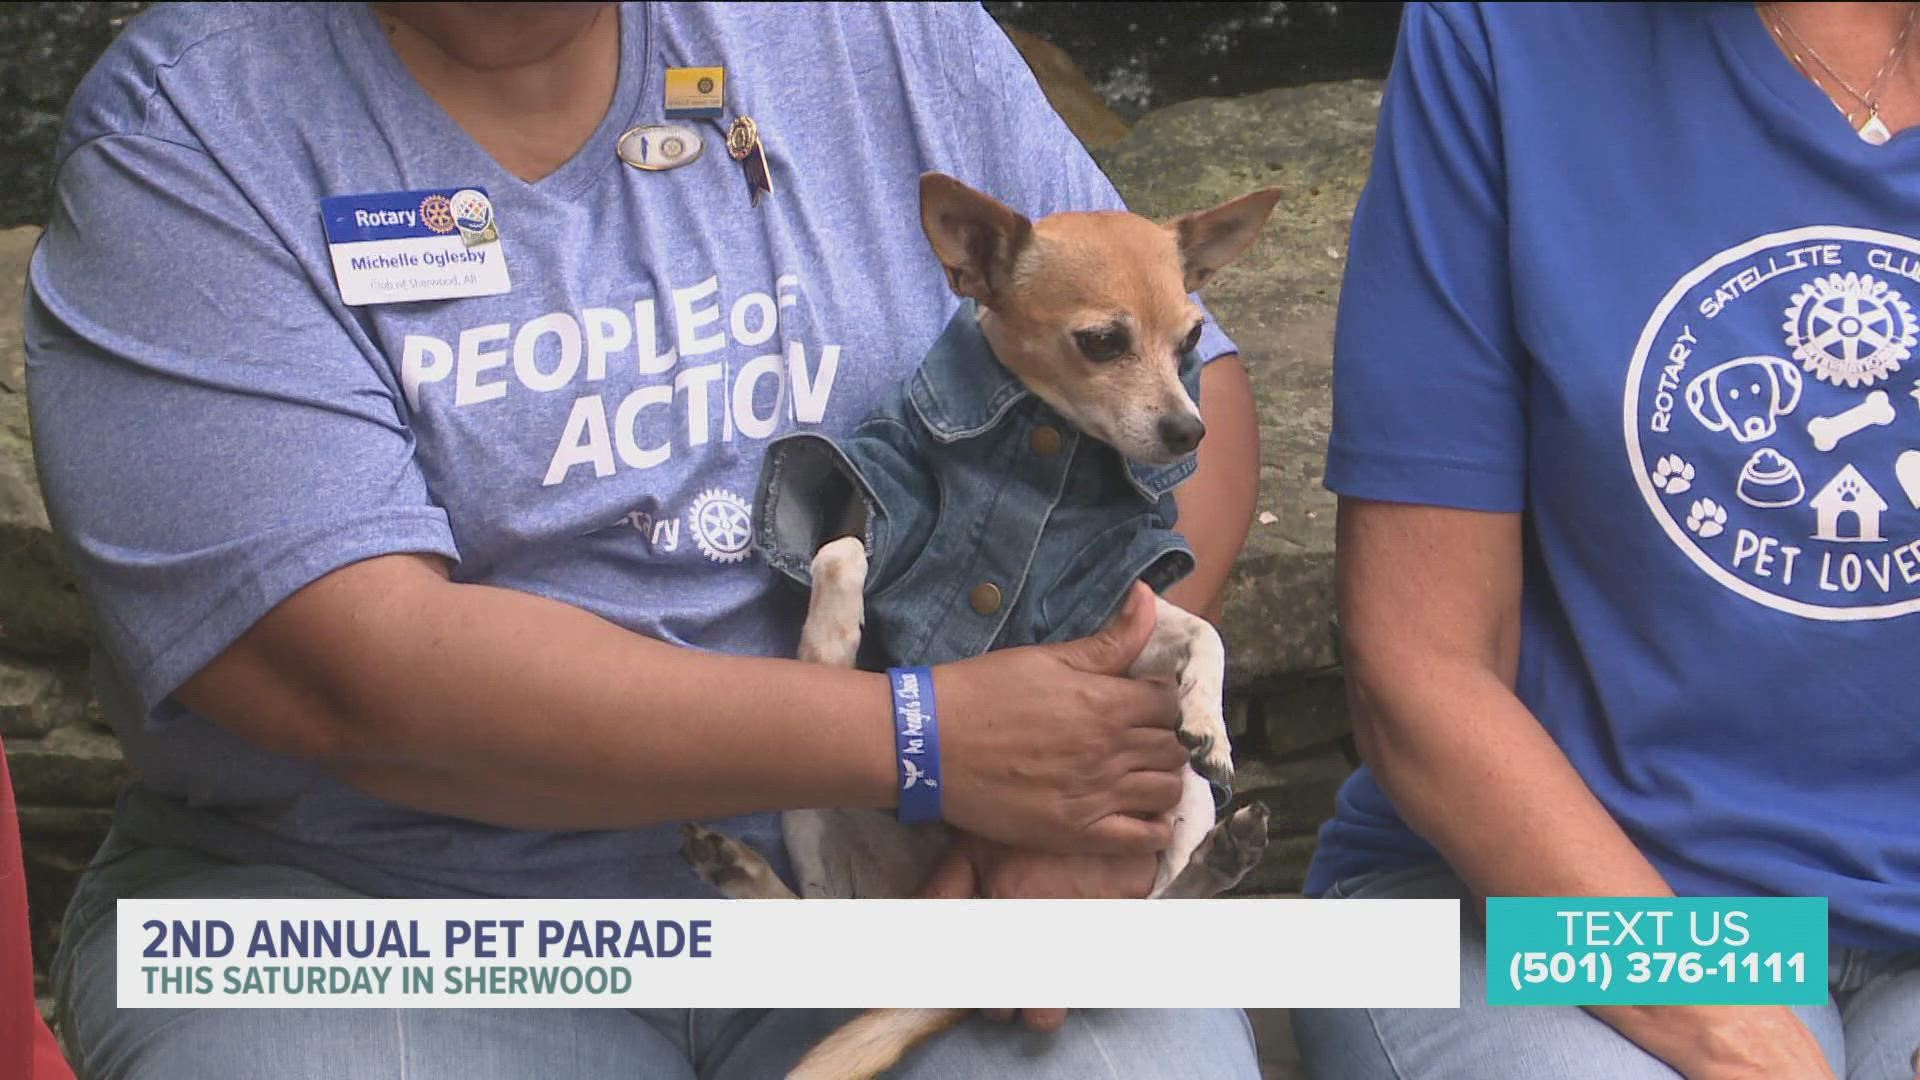 This weekend in Sherwood — there's one event going to the dogs and it's all for a good cause. Sarah and Michelle are here to tell us all about it.